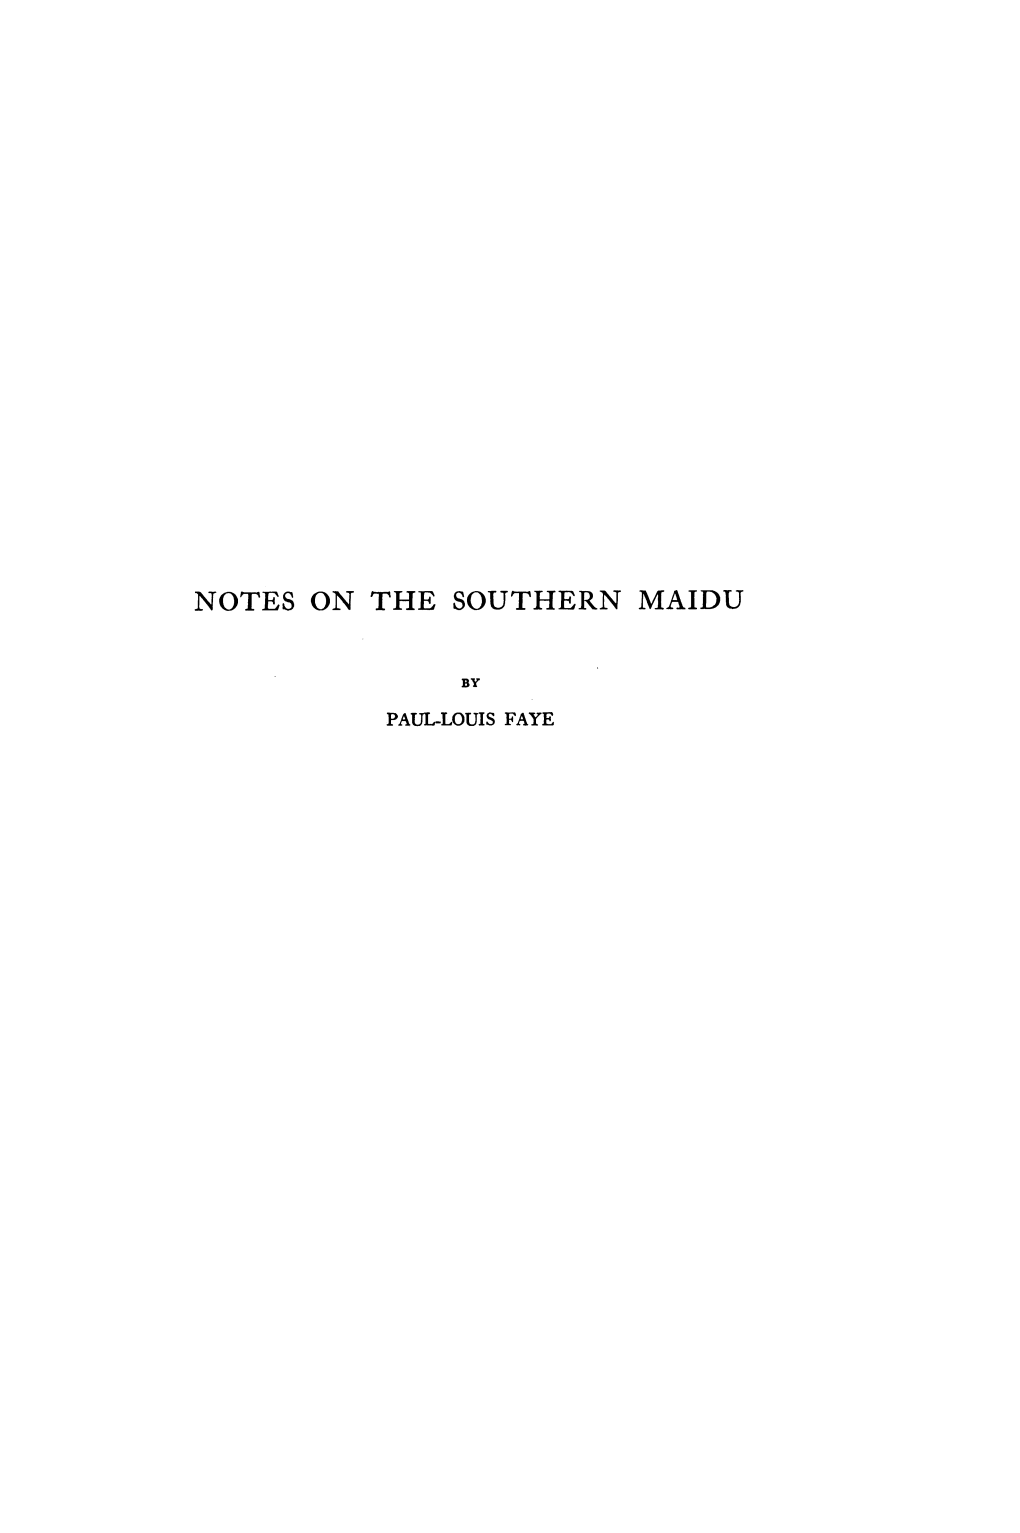 Notes on the Southern Maidu